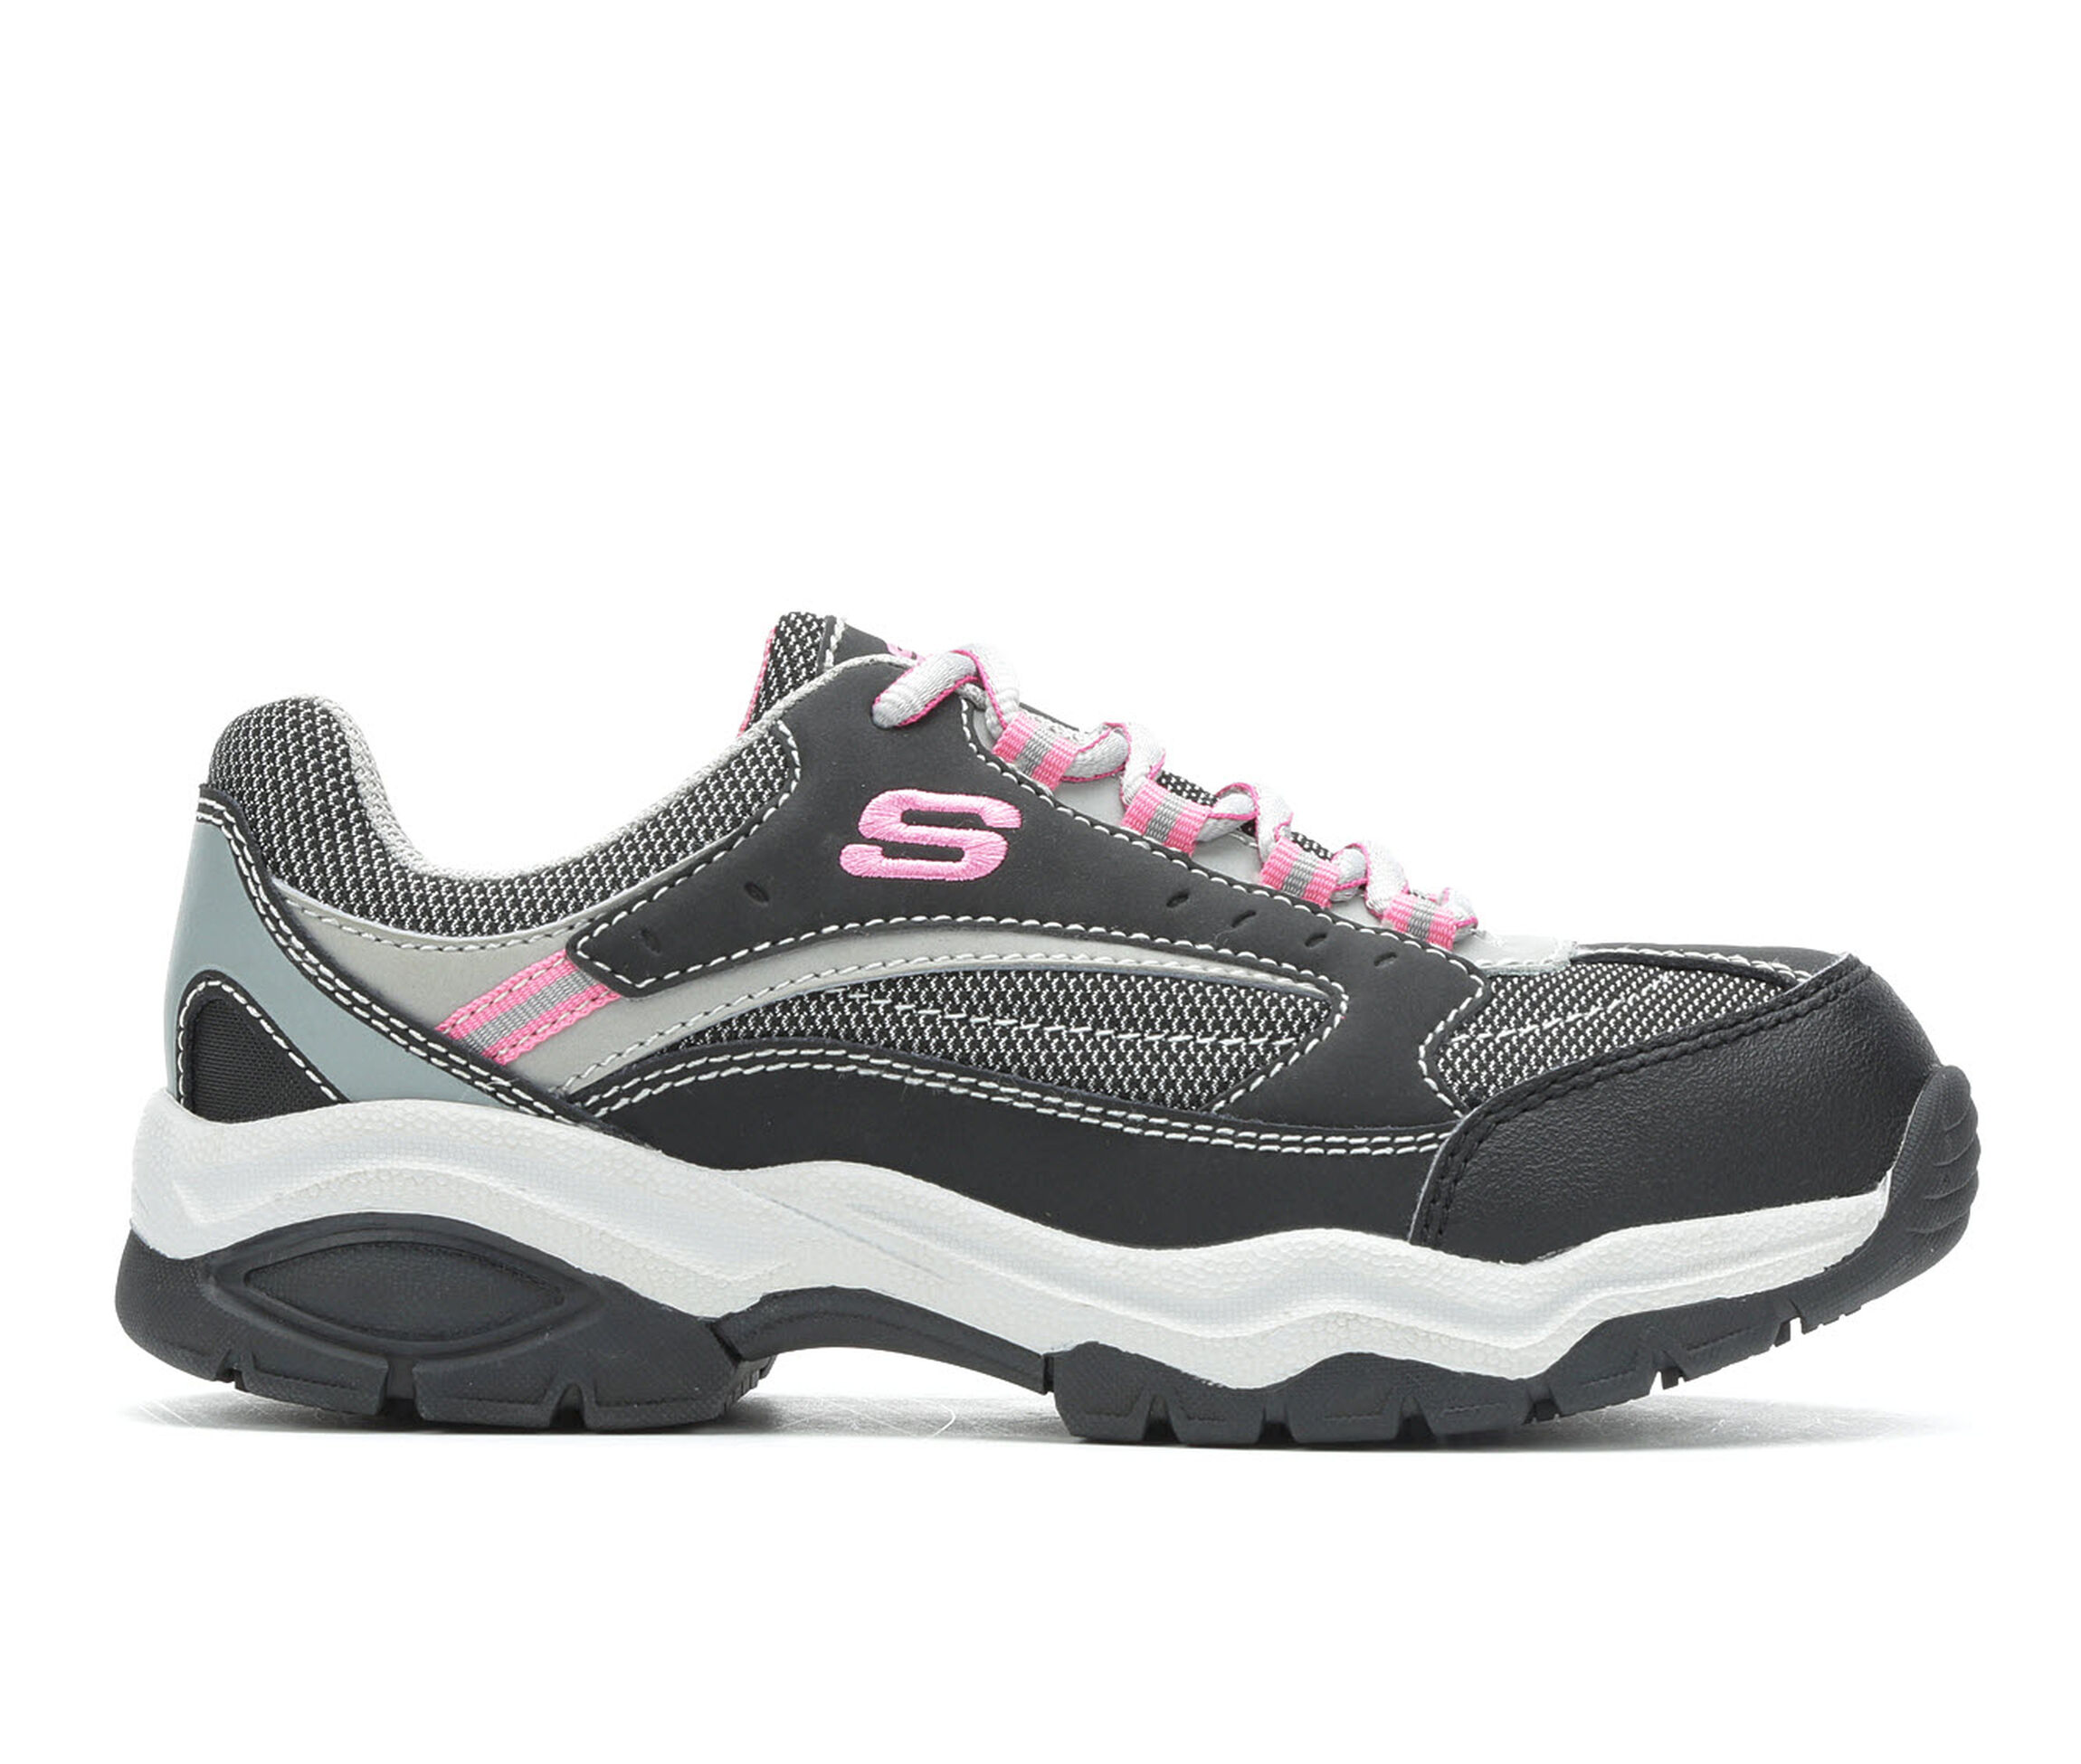 skechers work safety shoes